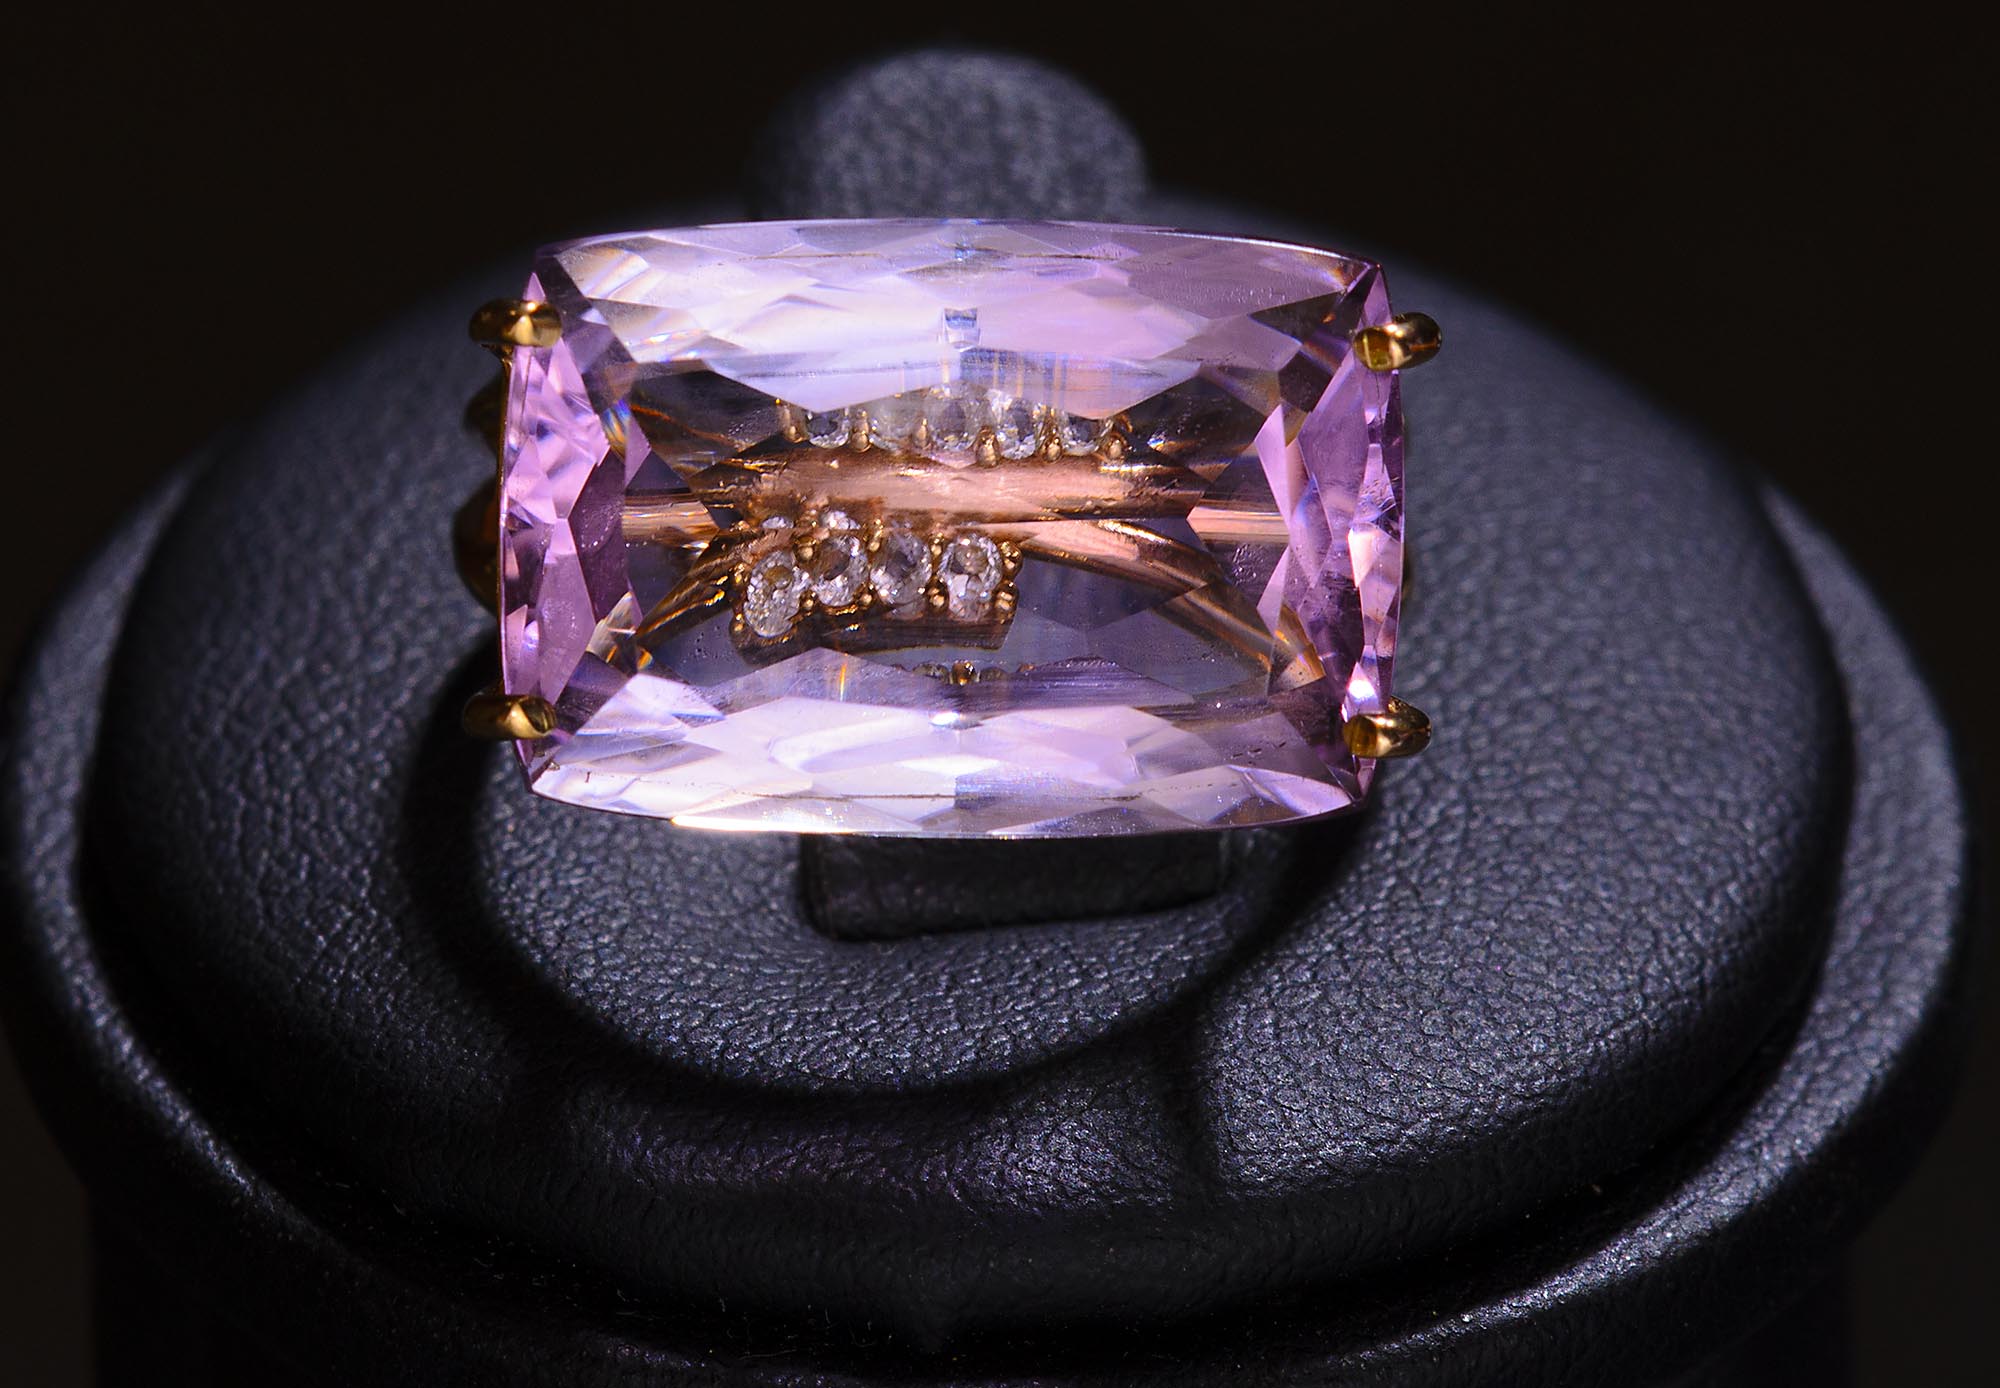 Ancient Amethyst Ring Found in Israel May Have Been Worn to Ward Off  Hangovers | Smart News| Smithsonian Magazine